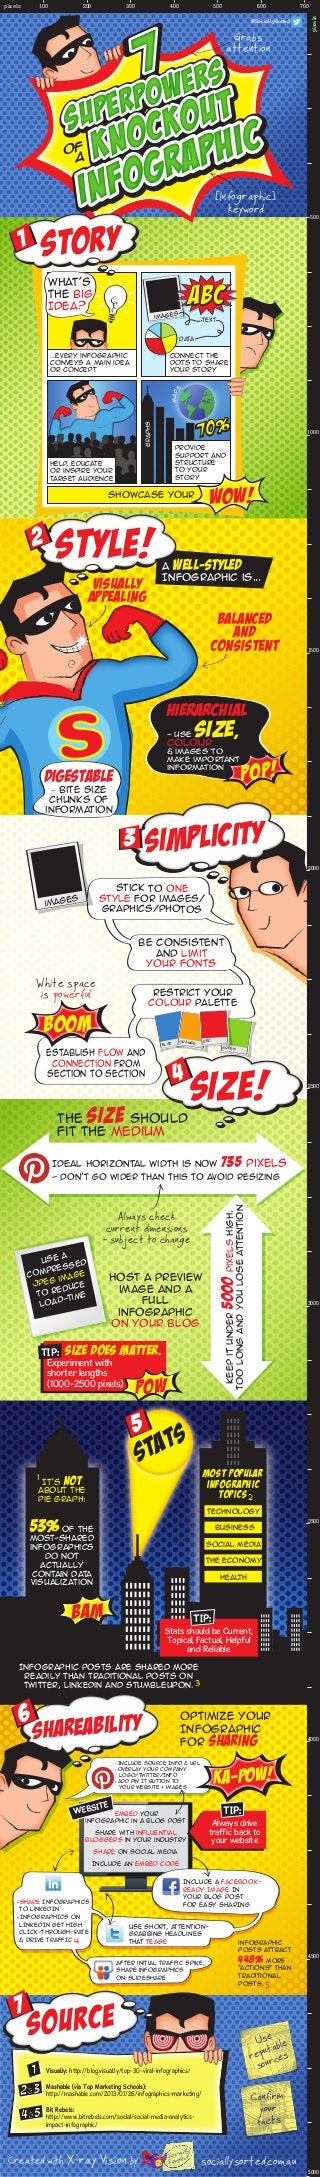 Grabs
attention
[Infographic]
keyword
@SociallySorted
of
a
story
...Every infographic
conveys a main idea
or concept
What’s
The Big
Idea?
images
data
text
connect the
dots to share
your story
help, educate
or inspire your
target audience
Showcase your
provide
support and
structure
to your
story
graphs
maps
WOW!
Stats
Infographic posts are shared more
readily than traditional posts on
Twitter, Linkedin and Stumbleupon.
It’s not
about the
pie graph:
53%of the
most-shared
infographics
do not
actually
contain data
visualization
most popular
infographic
topics
Stats should be Current,
Topical, Factual, Helpful
and Reliable
TIP:
1
2
3
technology
business
social media
the economy
health
optimize your
Infographic
for Sharingshareability
Embed your
infographic in a Blog Post
Share with influential
bloggers in your industry
Share on social media
Include an embed code
• Include Source Info & URL
• Overlay your Company
Logo/Twitter/Info
• Add Pin It Button to
your website + images
WEBSITE
KA-POW!
INCLUDE A FACEBOOK-
READY IMAGE IN
YOUR BLOG POST
FOR eASY SHARING
Use Short, Attention-
Grabbing Headlines
that Tease
After initial traffic spike,
share infographics
on SlideShare
• Share Infographics
to LinkedIn
• INFOGRAPHICS ON
LINKEDIN GET HIGH
CLICK-THROUGH-RATE
& DRIVE TRAFFIC 4 infographic
posts attract
448% more
“actions” than
traditional
posts. 5
TIP:
Always drive
traffic back to
your website
s
A well-styled
Infographic is...
POP!
Hierarchial
- Use size,
colour
& images to
make important
information
Digestable
– bite size
chunks of
information
Visually
appealing
Balanced
and
consistent
STYLE!
Visual.ly: http://blog.visual.ly/top-30-viral-infographics/
Mashable (via Top Marketing Schools):
http://mashable.com/2013/01/26/infographics-marketing/
Bit Rebels:
http://www.bitrebels.com/social/social-media-analytics-
impact-infographic/
Source
1
4&5
2&3
Created with X-ray Vision by sociallysorted.com.au
Soci
Sorted
s
Use
reputable
sources
Confirm
your
facts
be consistent
and limit
your fonts
restrict your
colour palette
simplicity
Establish flow and
connection from
section to section
stick to one
style for images/
graphics/photos
BOOm
images
blue
ORANGE
GREEN
RED
White space
is powerful
the size should
fit the medium
Host a preview
image and a
full
infographic
on your blog
Use a
Compressed
JPEG image
to reduce
load-time
SizE!
Size Does Matter.
Experiment with
shorter lengths
(1000-2500 pixels)
TIP:
pow
bam
Ideal Horizontal Width is now 735 pixels
- Don't go wider than this to avoid resizing
keepitunder5000pixelshigh.
Toolongandyouloseattention
Always check
current dimensions
- subject to change
1
2
3
4
5
6
7
1000
500
1500
2500
3500
4500
2000
3000
4000
5000
100pixels 200 300 400 500 600 700
pixels
 